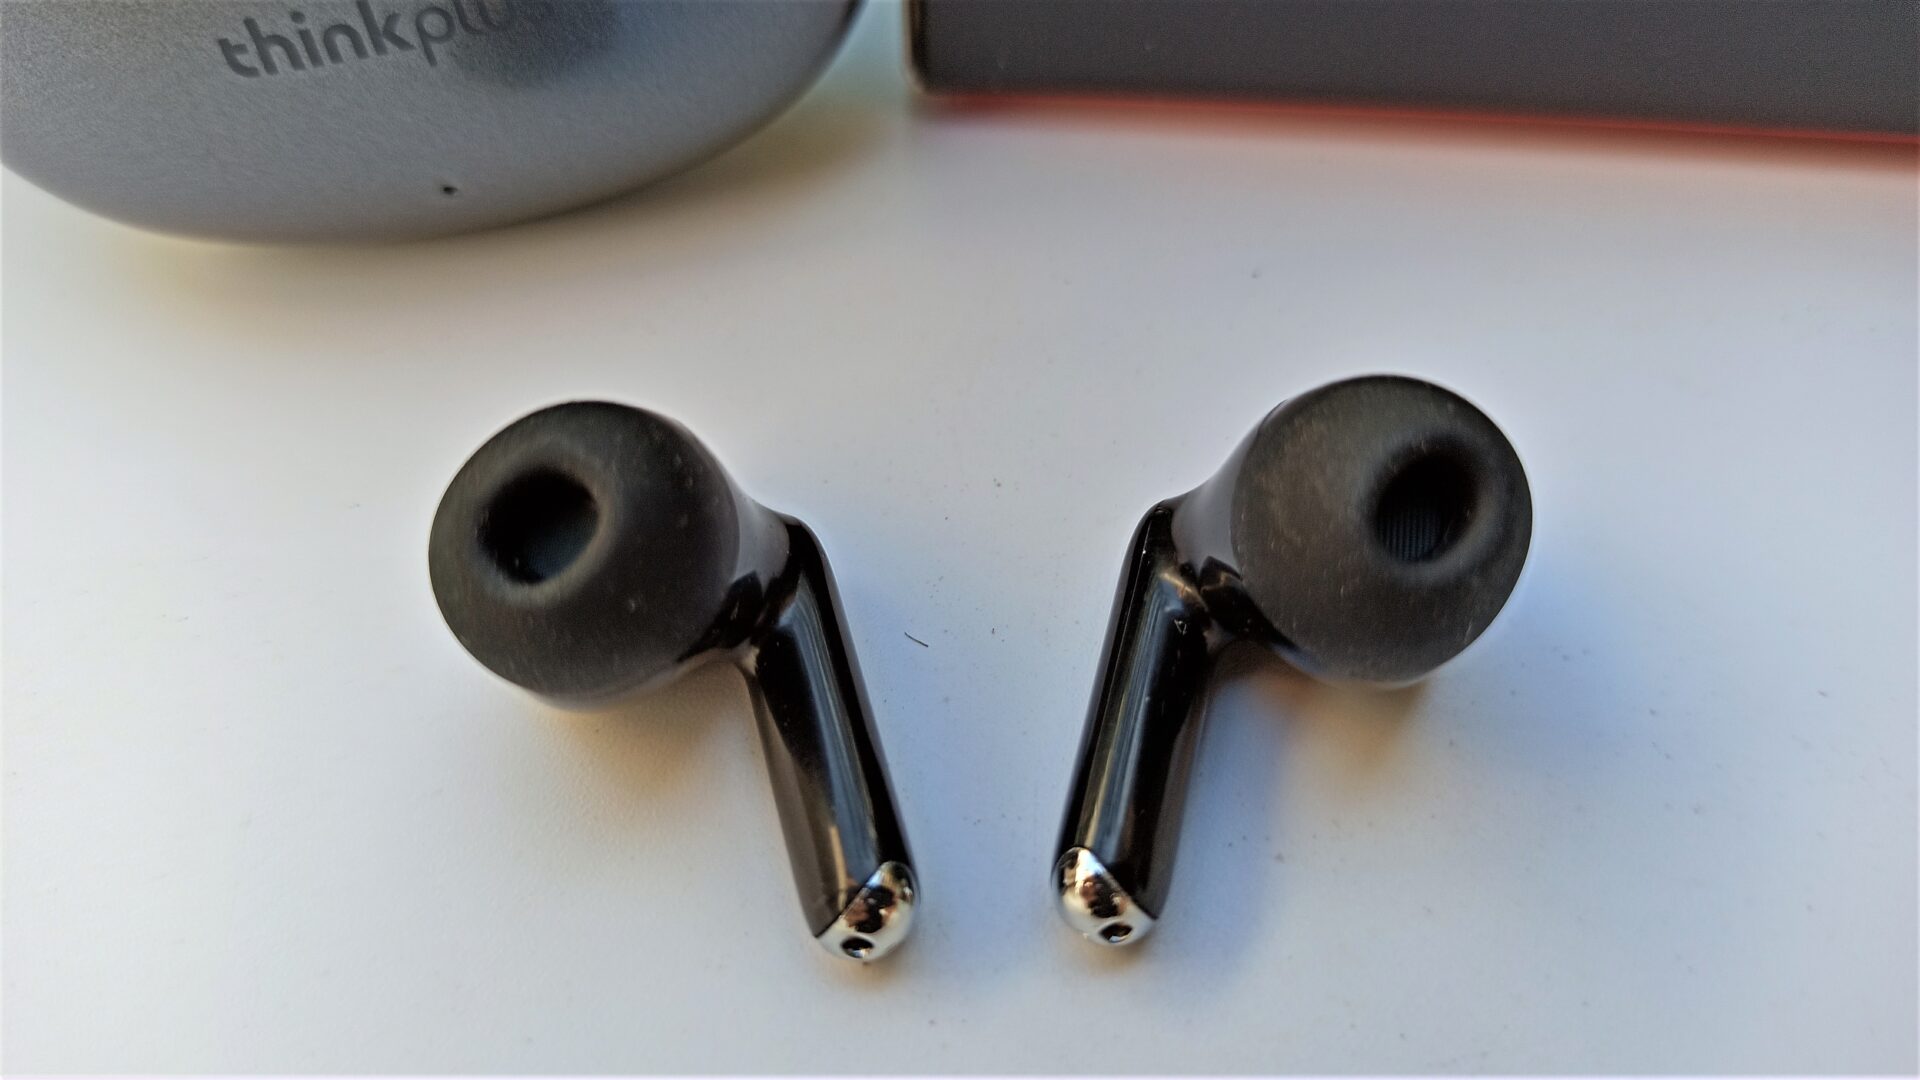 Lenovo XT88 Earbuds Review - Lenovo XT88 earbuds